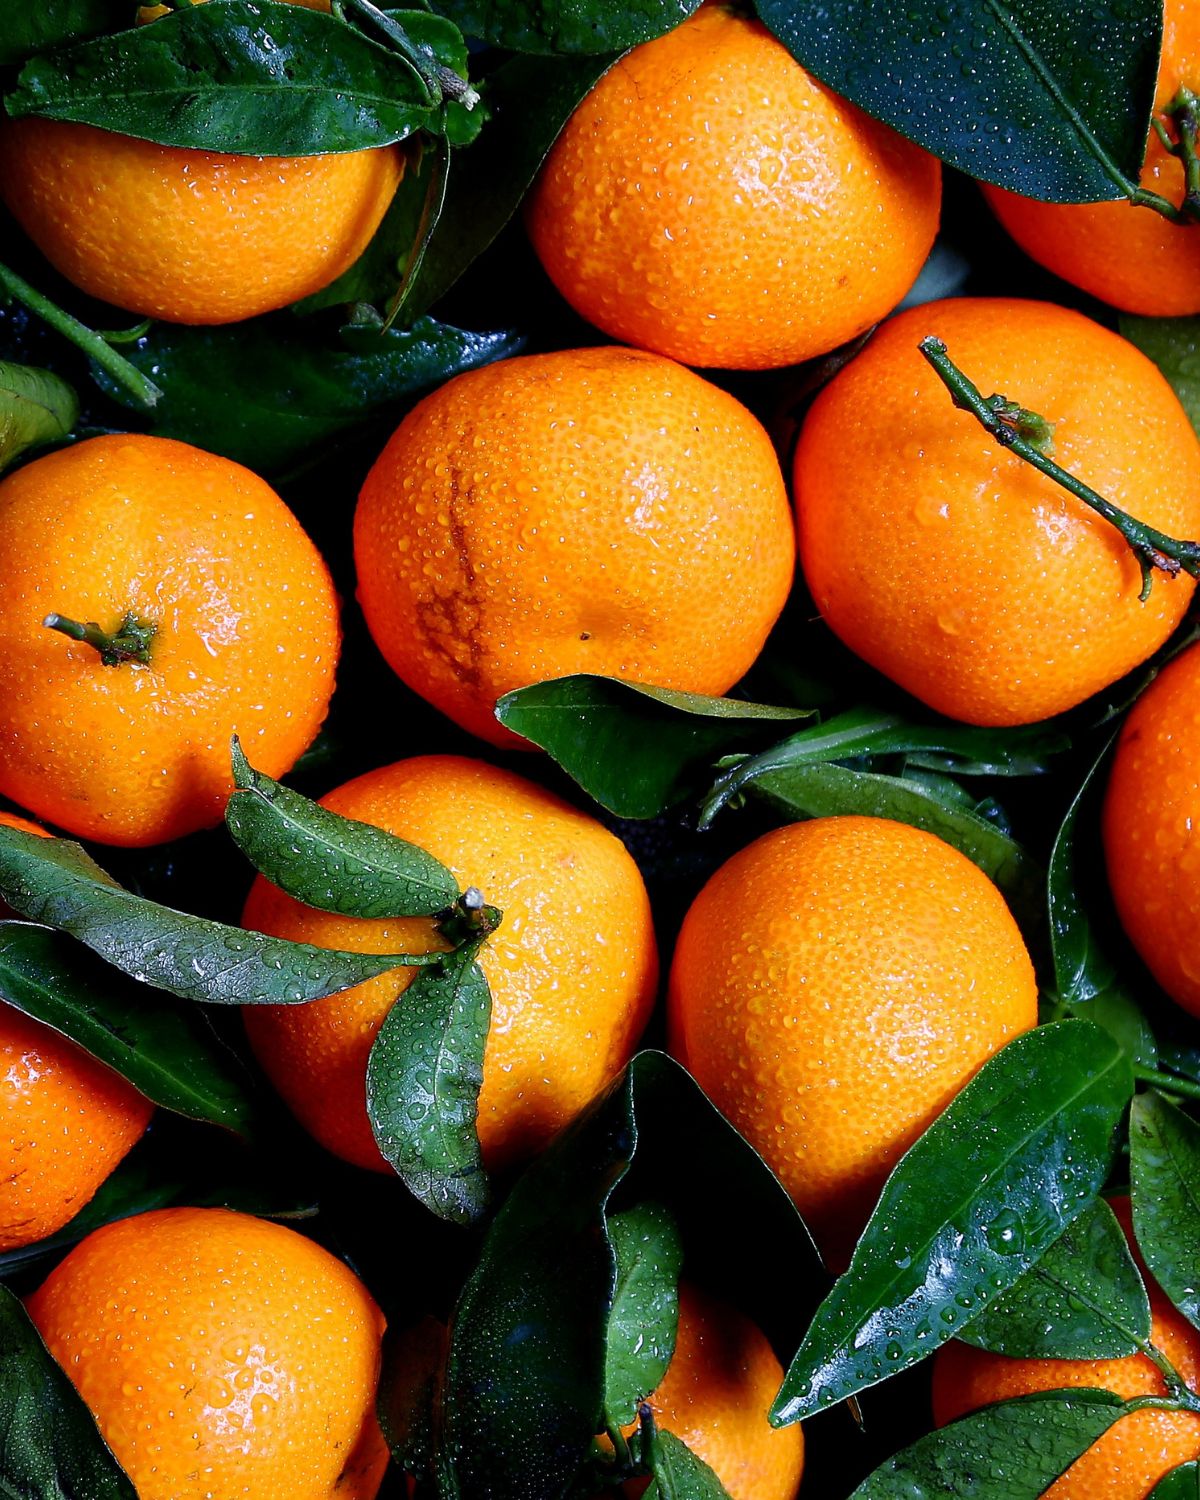 A photo of fresh oranges and greenery.